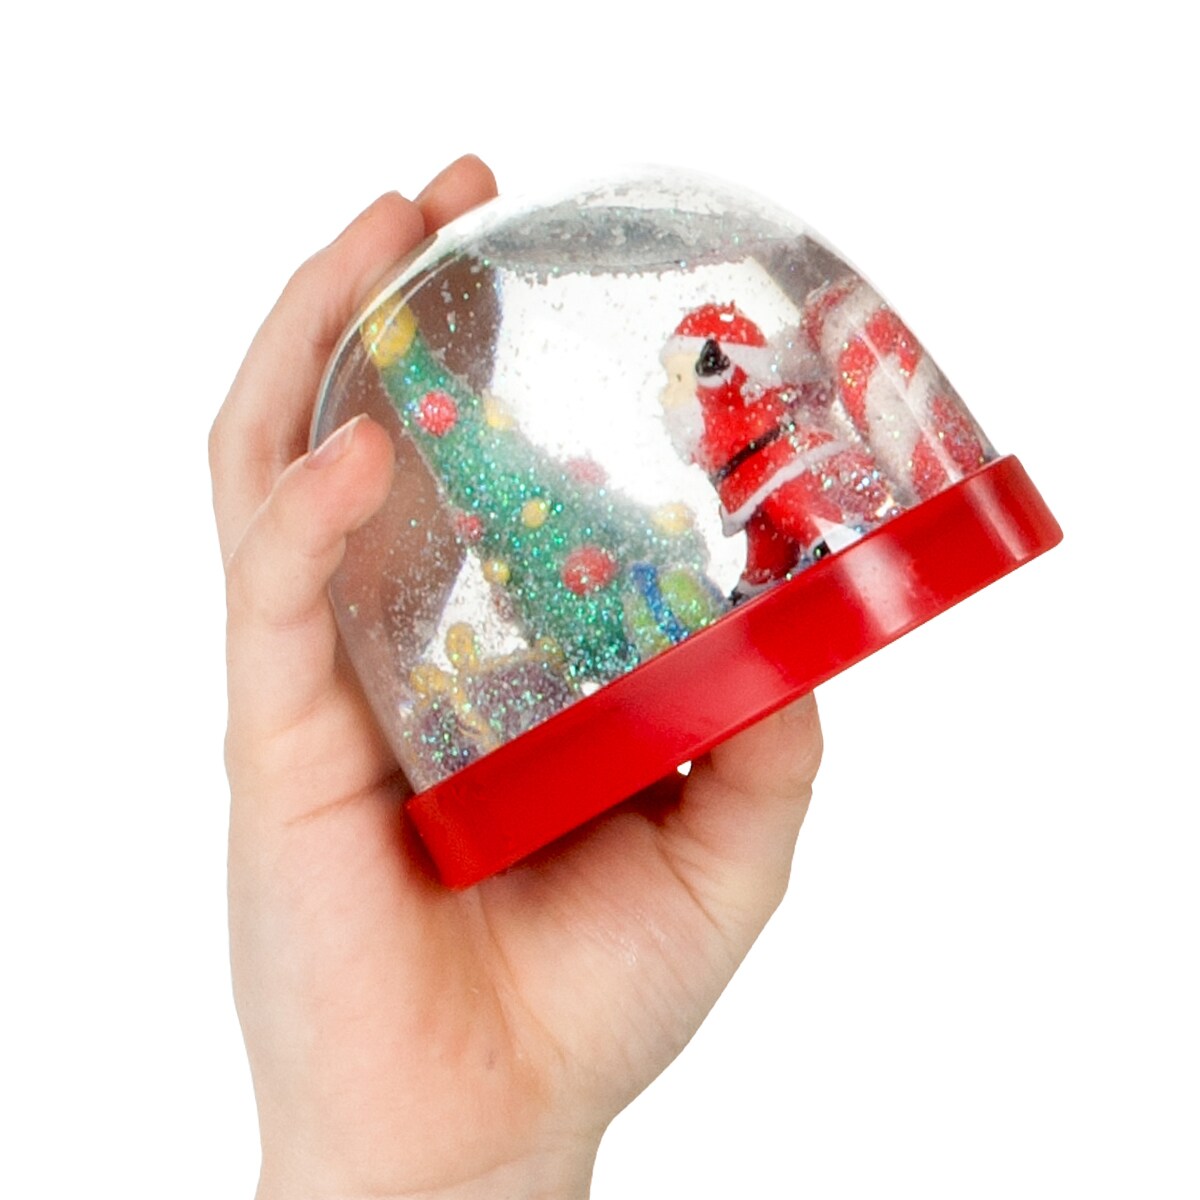 Make Your Own Snow Storm Globe Glitter Modelling Clay Christmas Craft Set 0491 